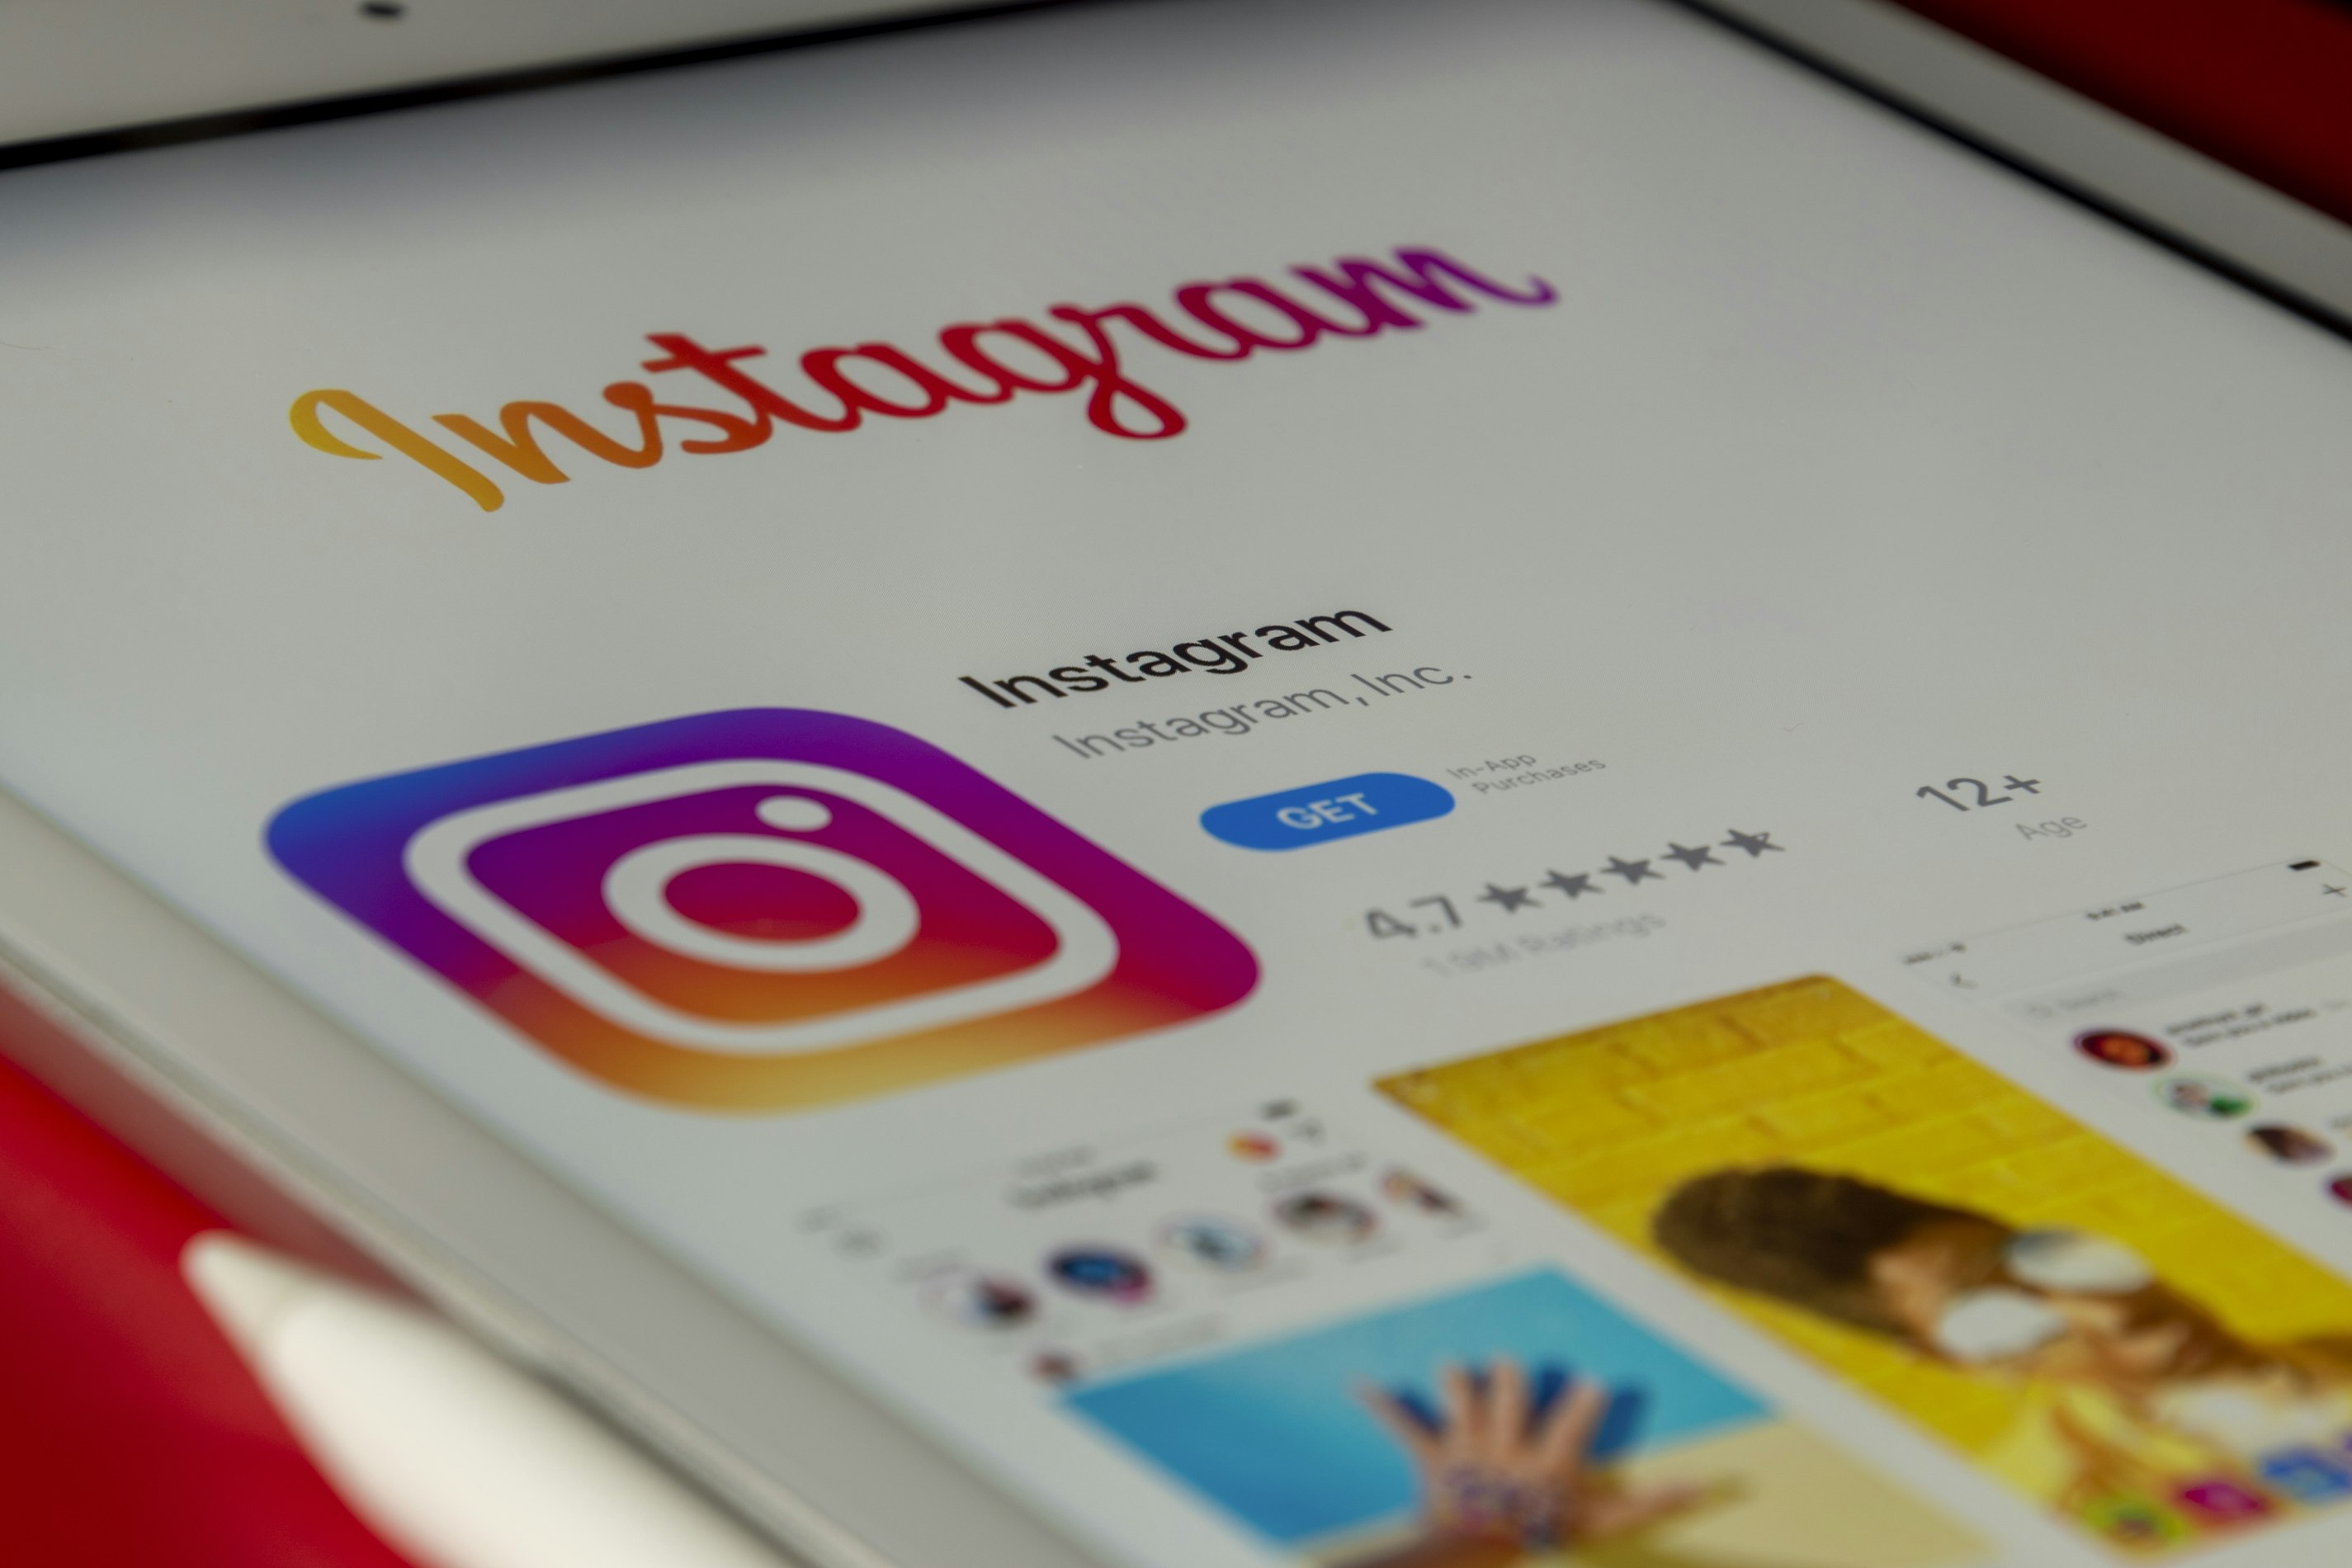 5 Instagram Tips to Grow Your Business